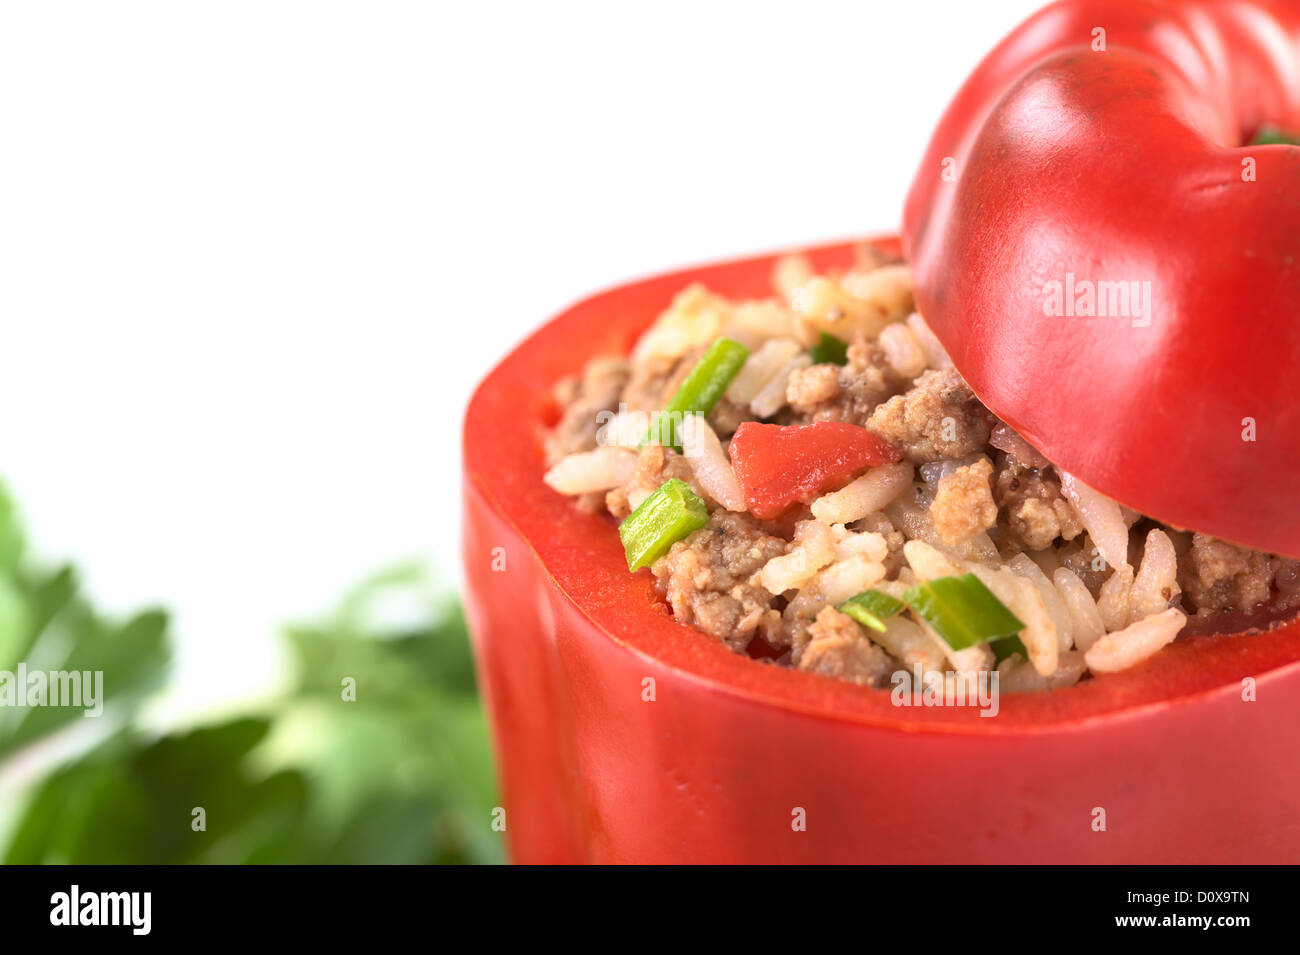 Unbaked stuffed red bell pepper filled with ground meat, onion, rice, tomato and green onion Stock Photo